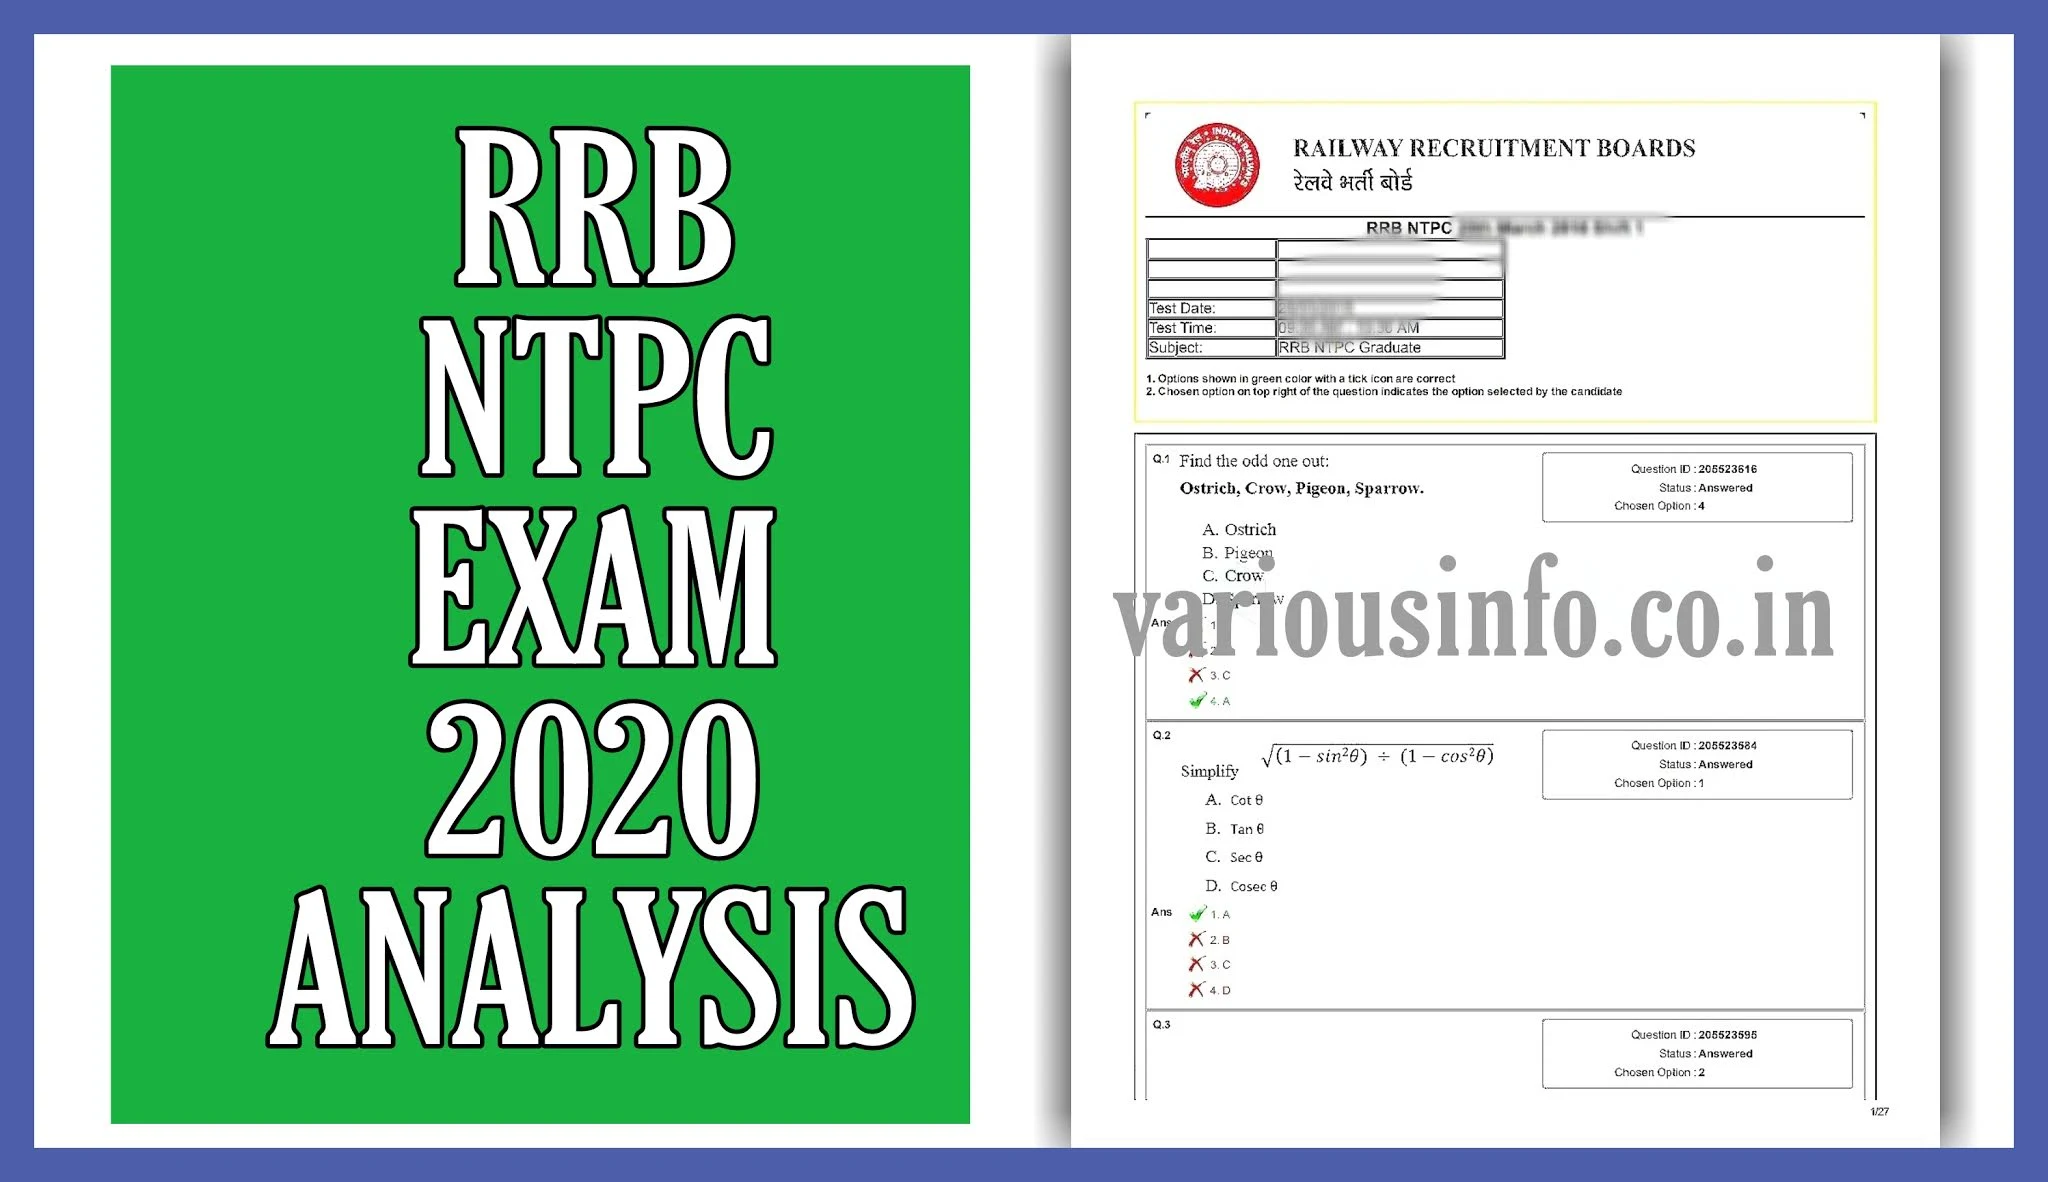 RRB NTPC Exam Analysis 2020 in hindi: RRB NTPC Exam 28th December 2020 Shift-2 का Analysis और Review